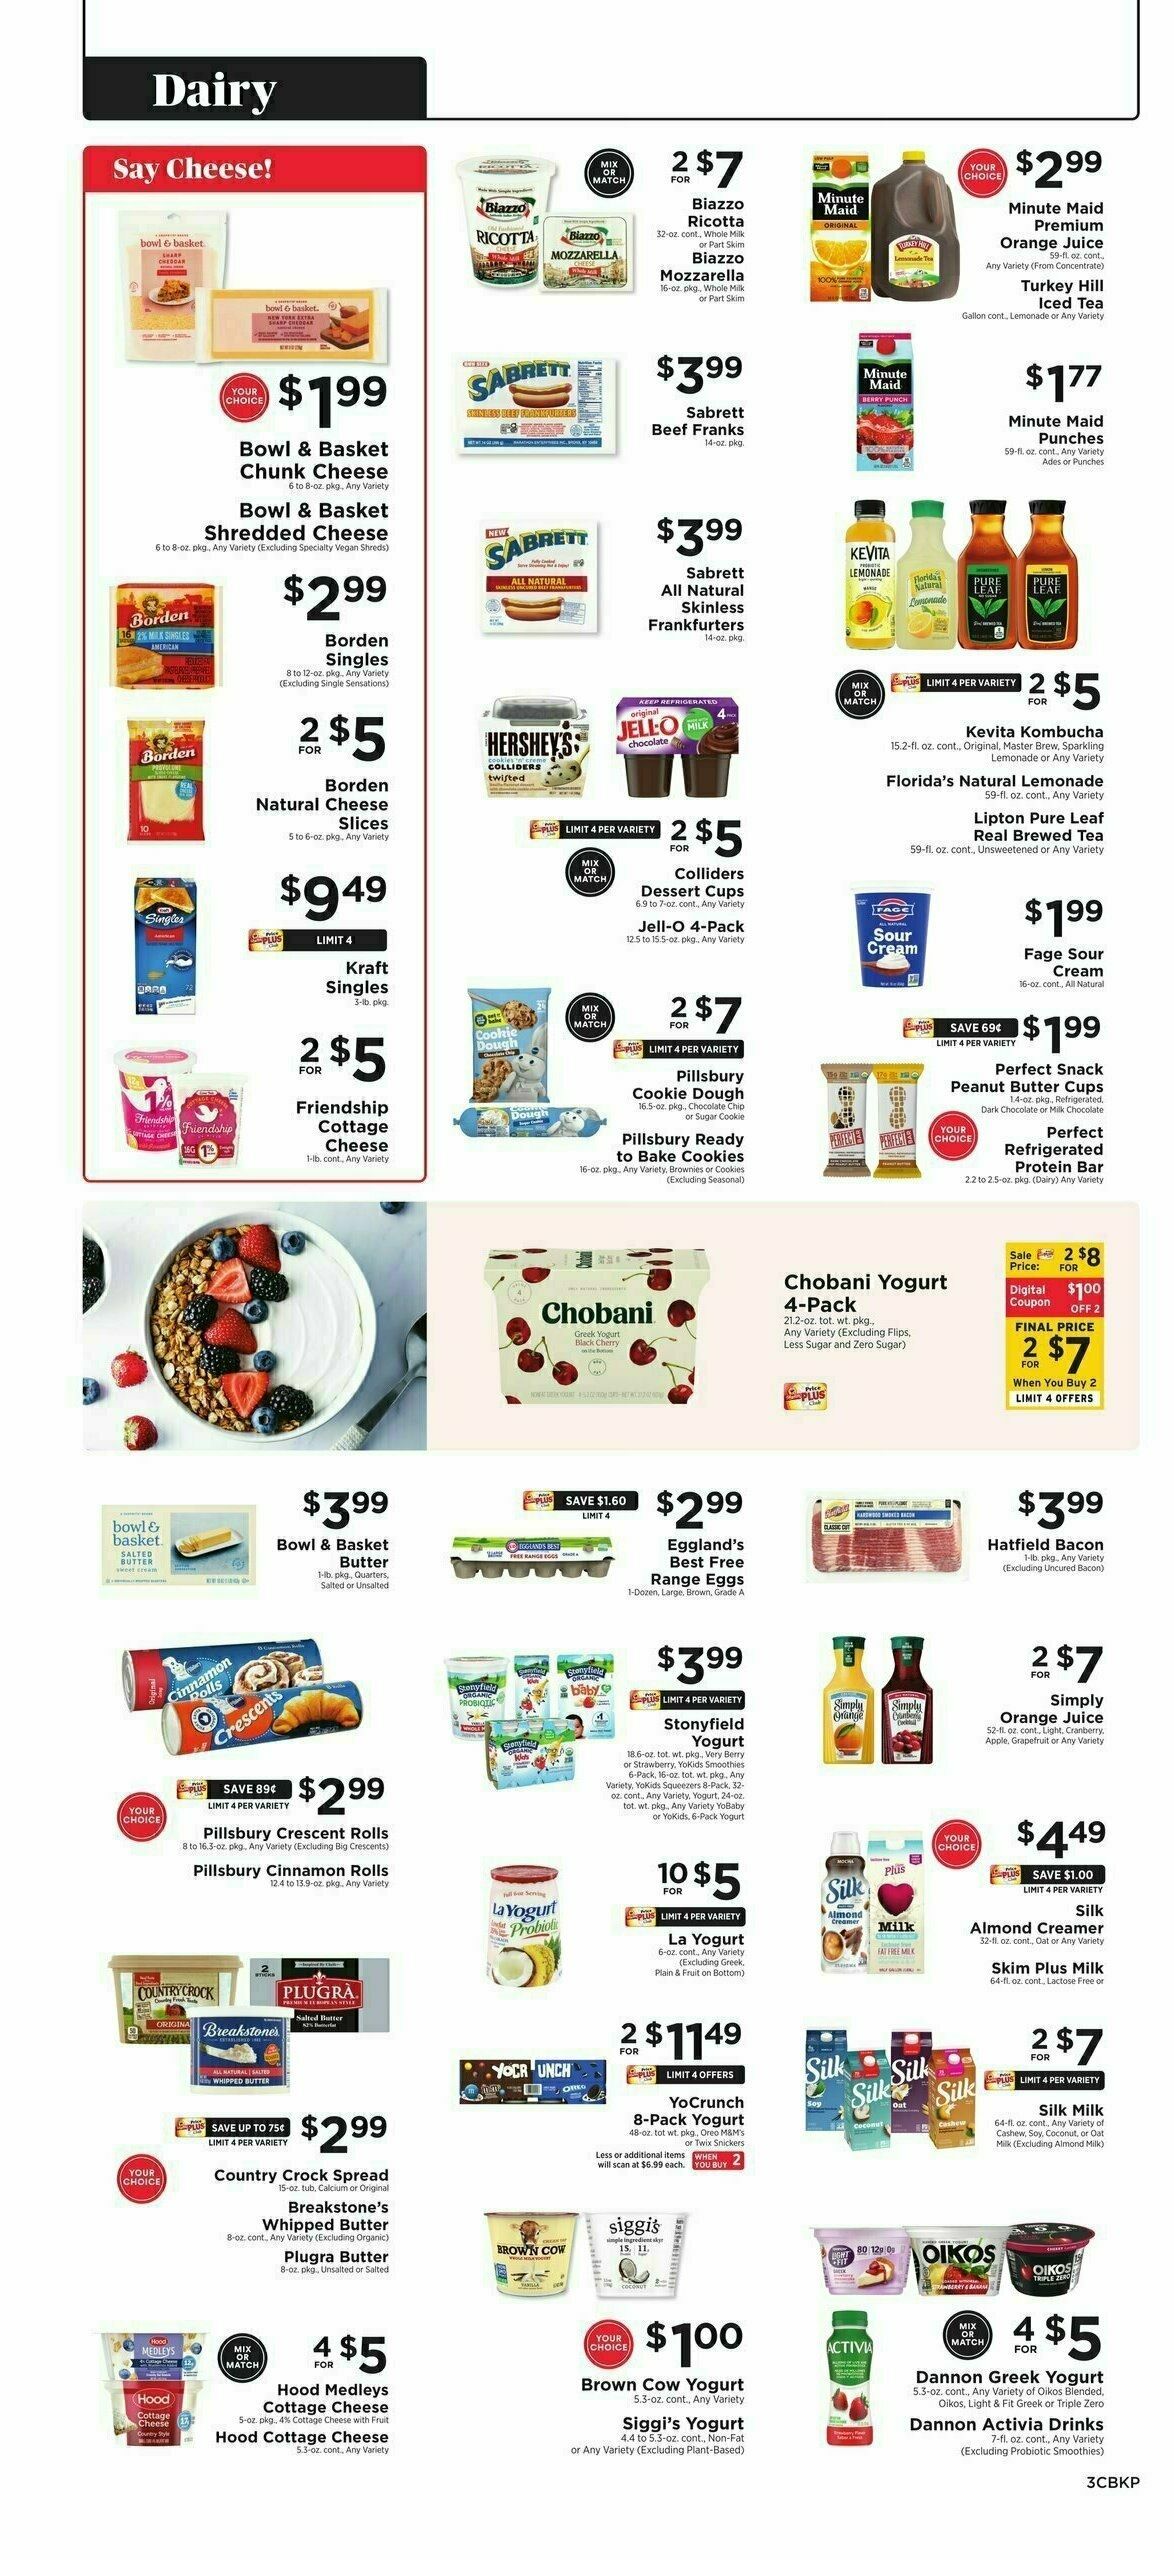 ShopRite Weekly Ad from January 19